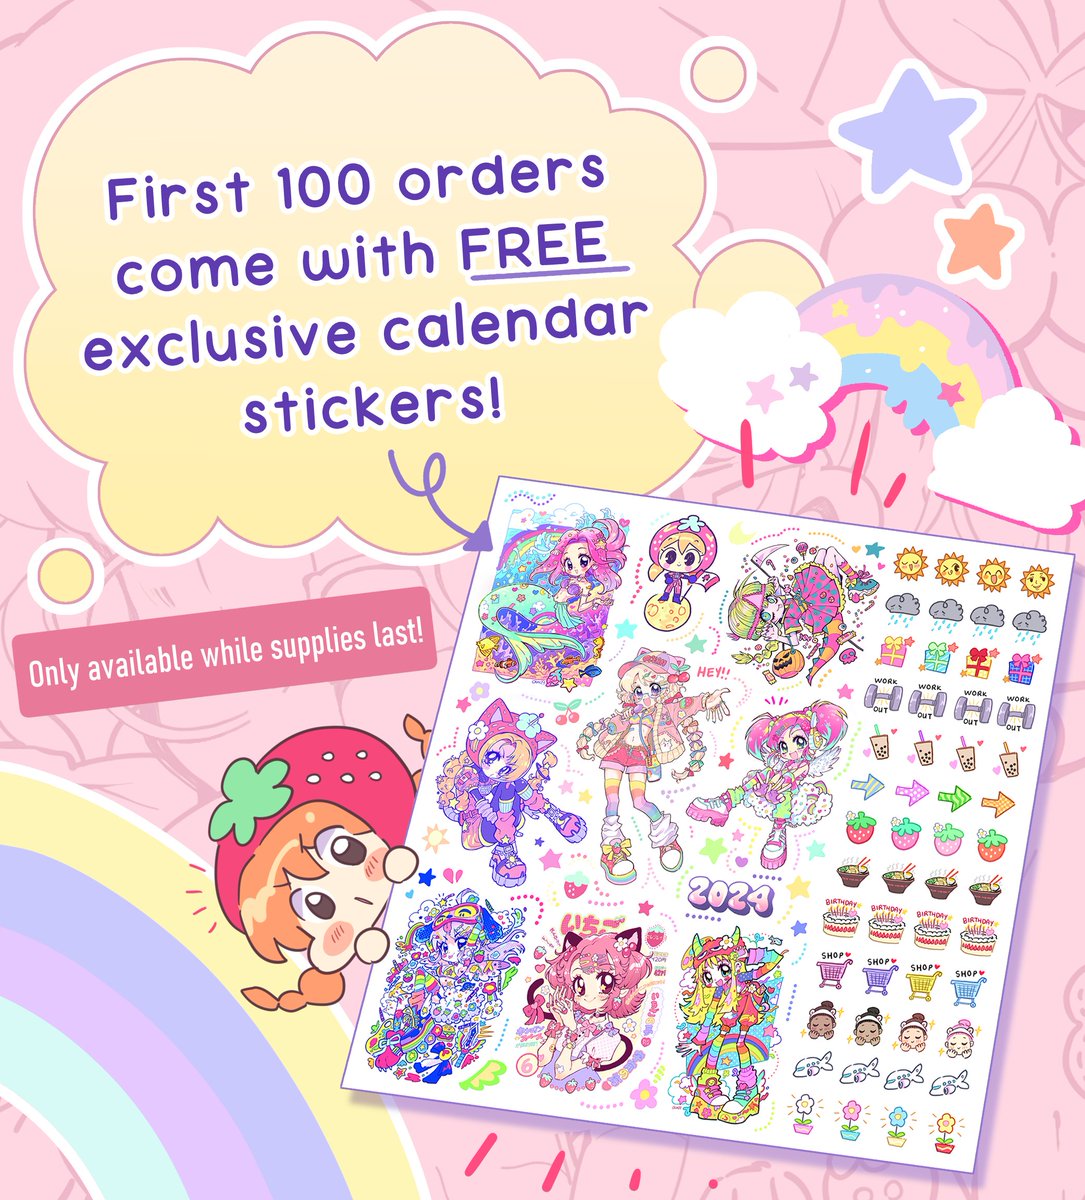 First 100 orders will receive FREE clear planner stickers!